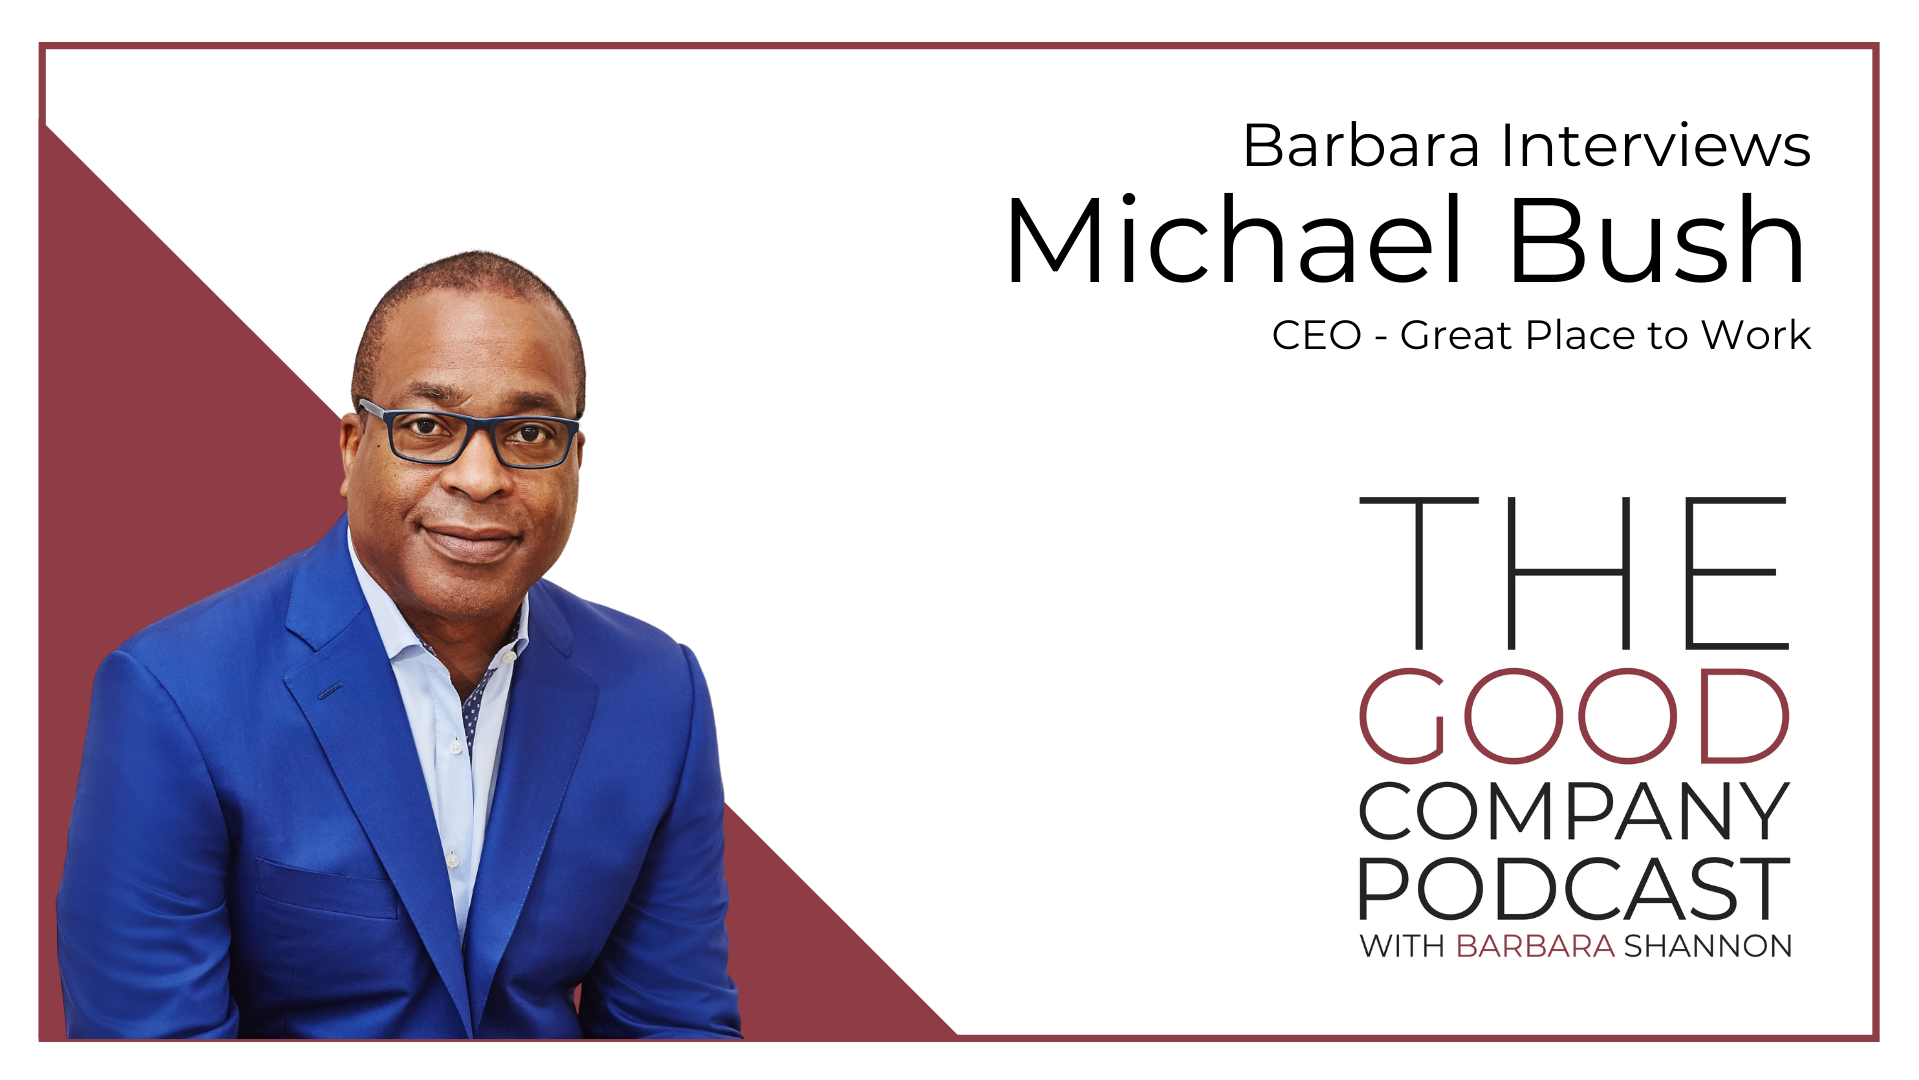  CEO of Great Place to Work, Michael C. Bush, is interviewed by Barbara Shannon of The Good Company Podcast